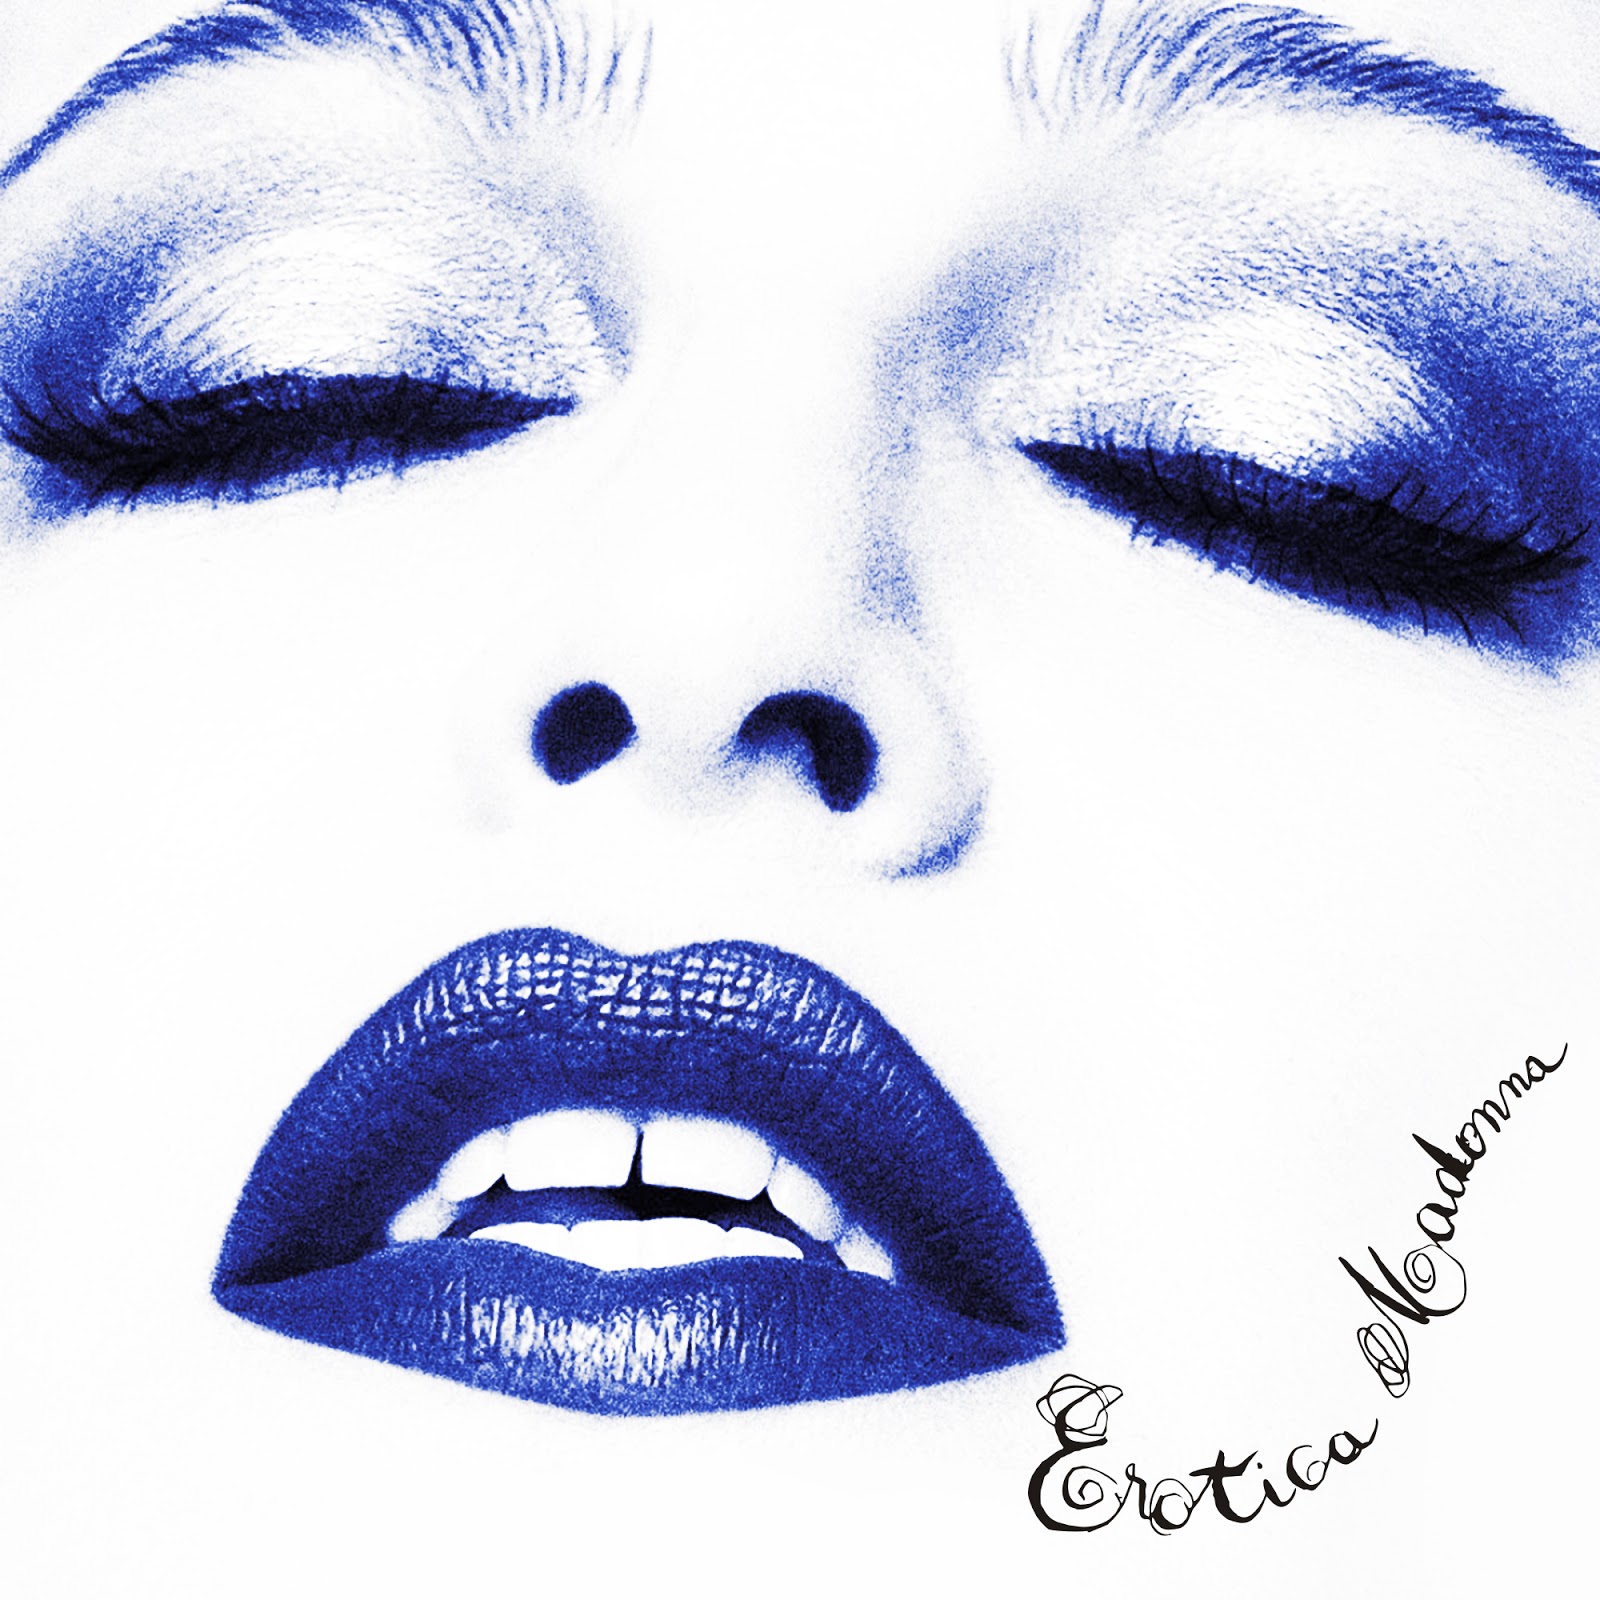 Madonna Fanmade Covers Erotica 25th Anniversary Edition 